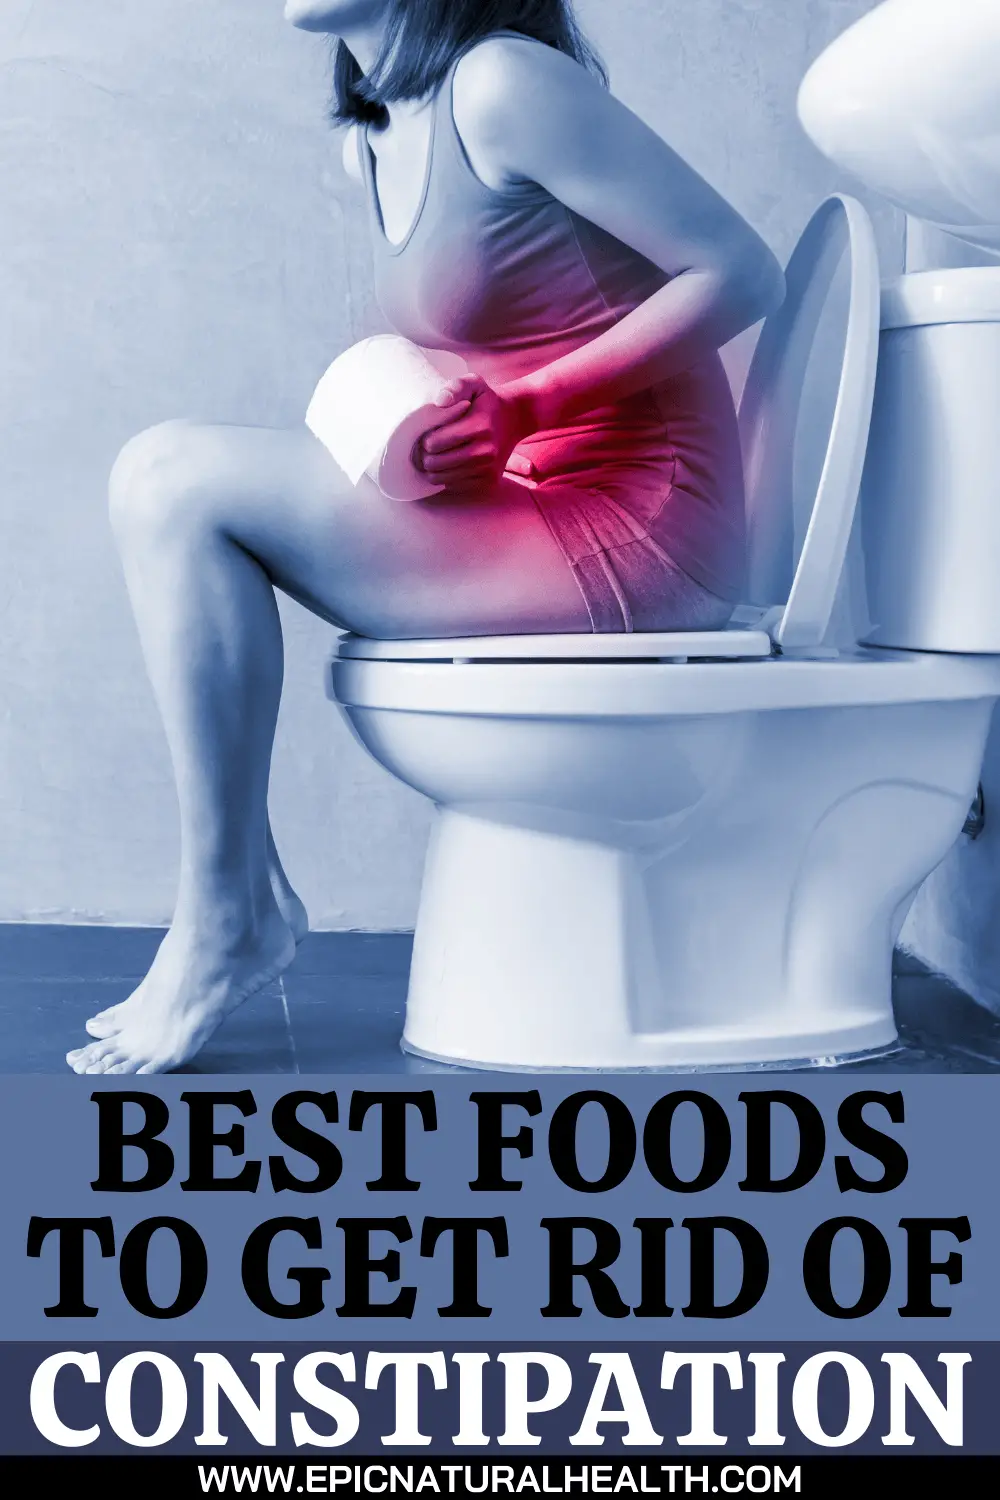 Best Foods to Get Rid of Constipation